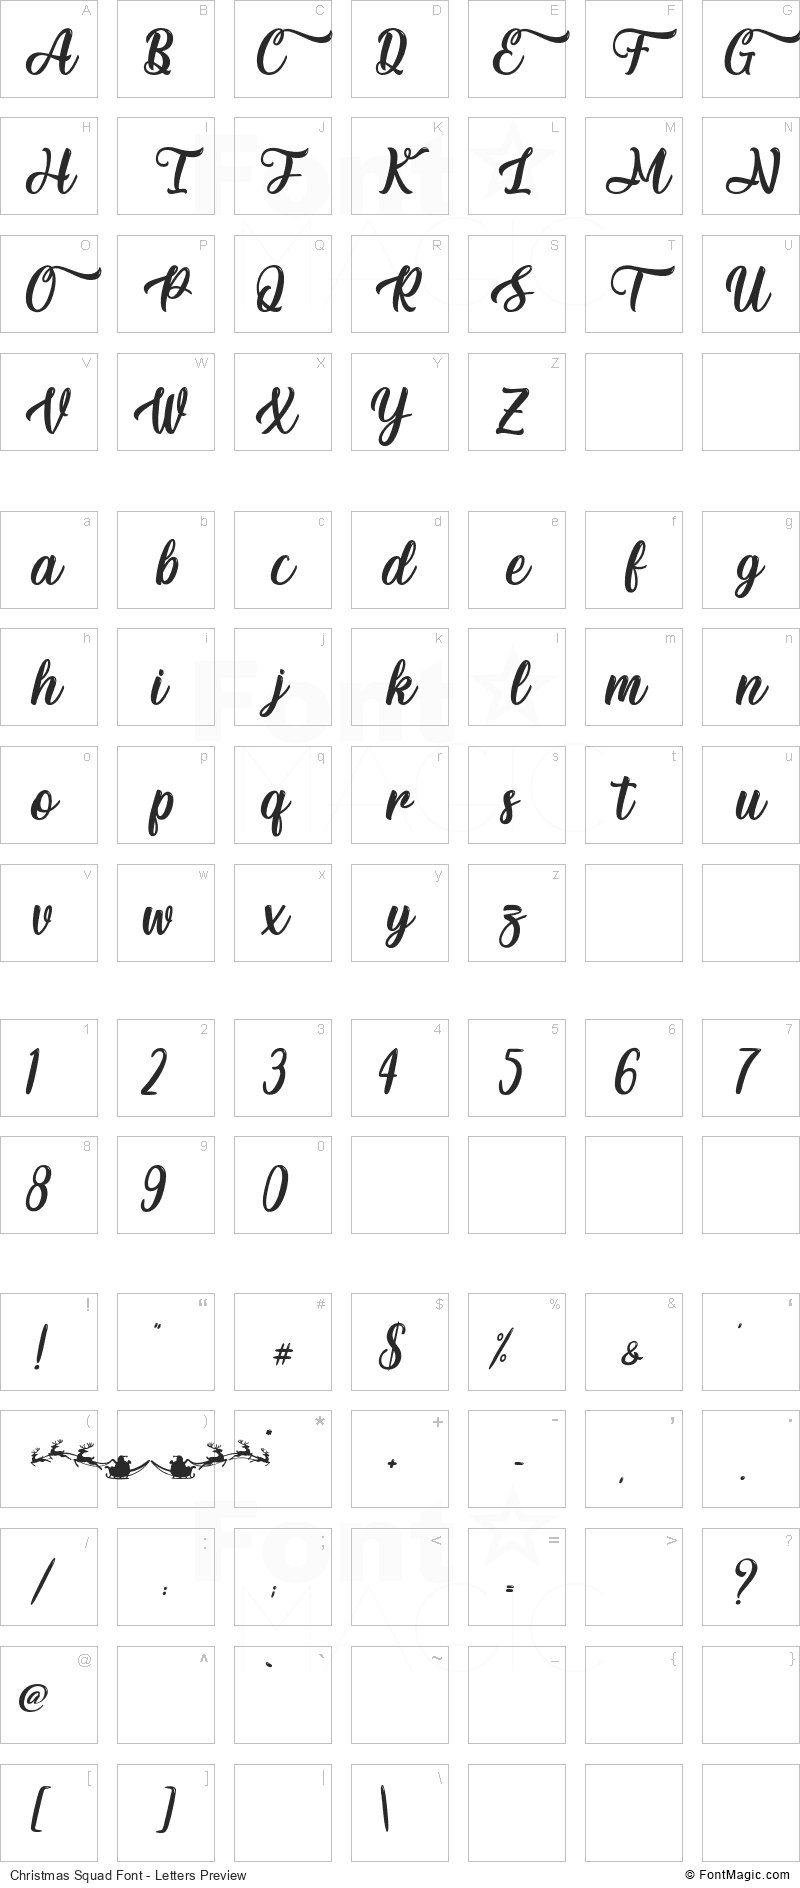 Christmas Squad Font - All Latters Preview Chart